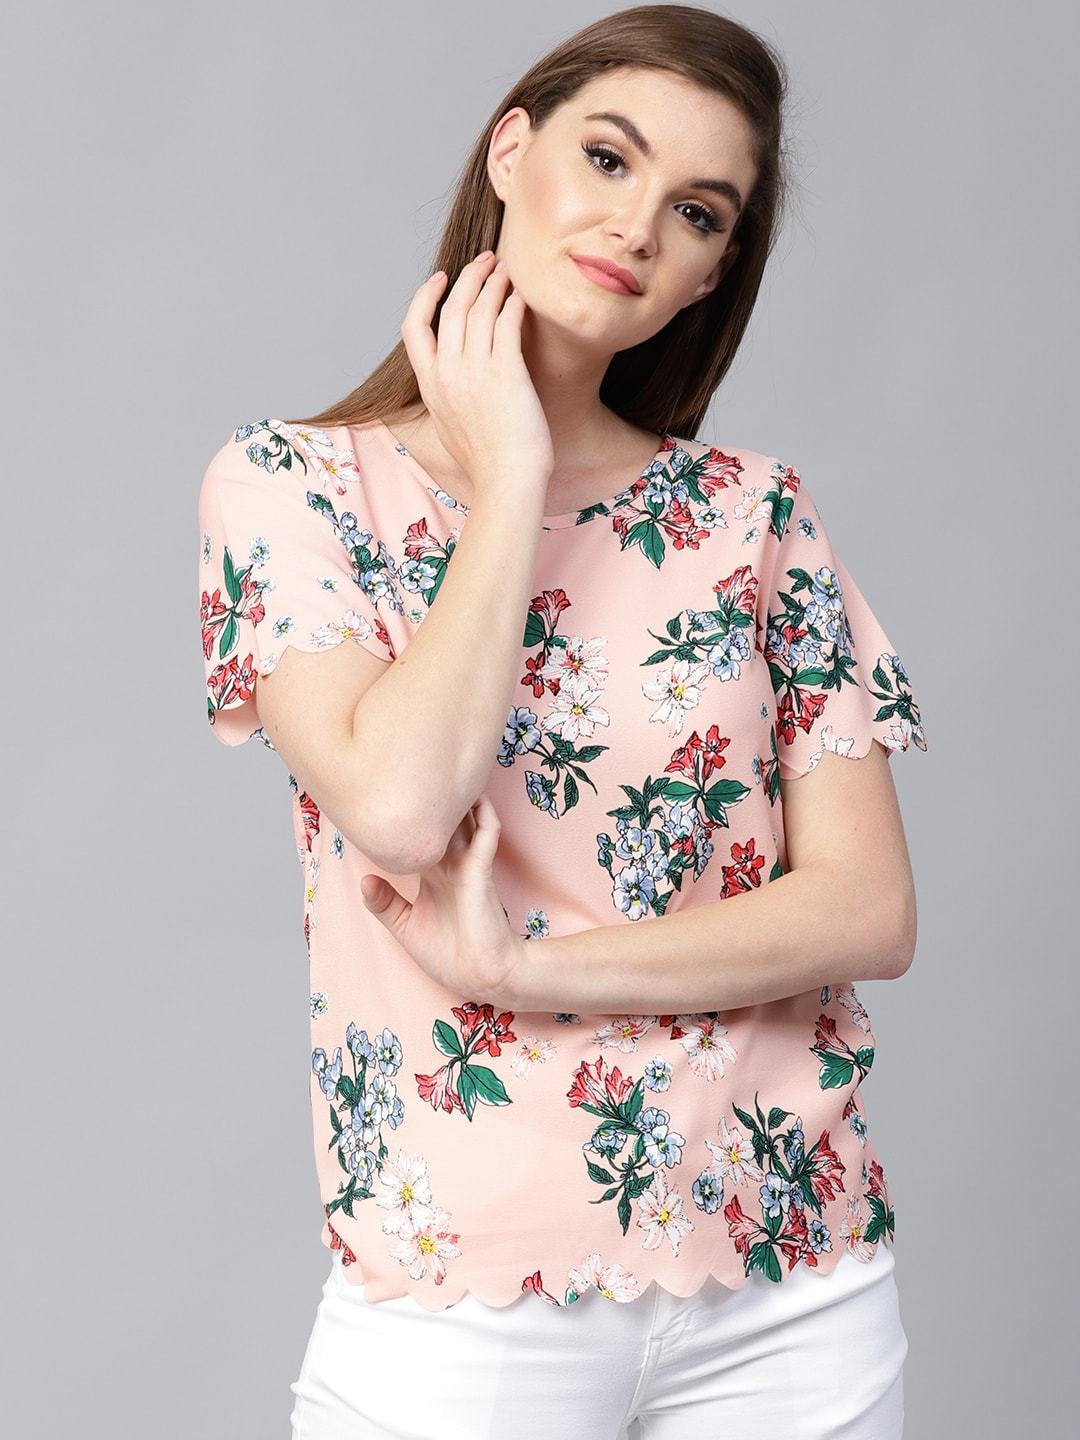 Women's Peach Floral Scalloped Top - Pannkh